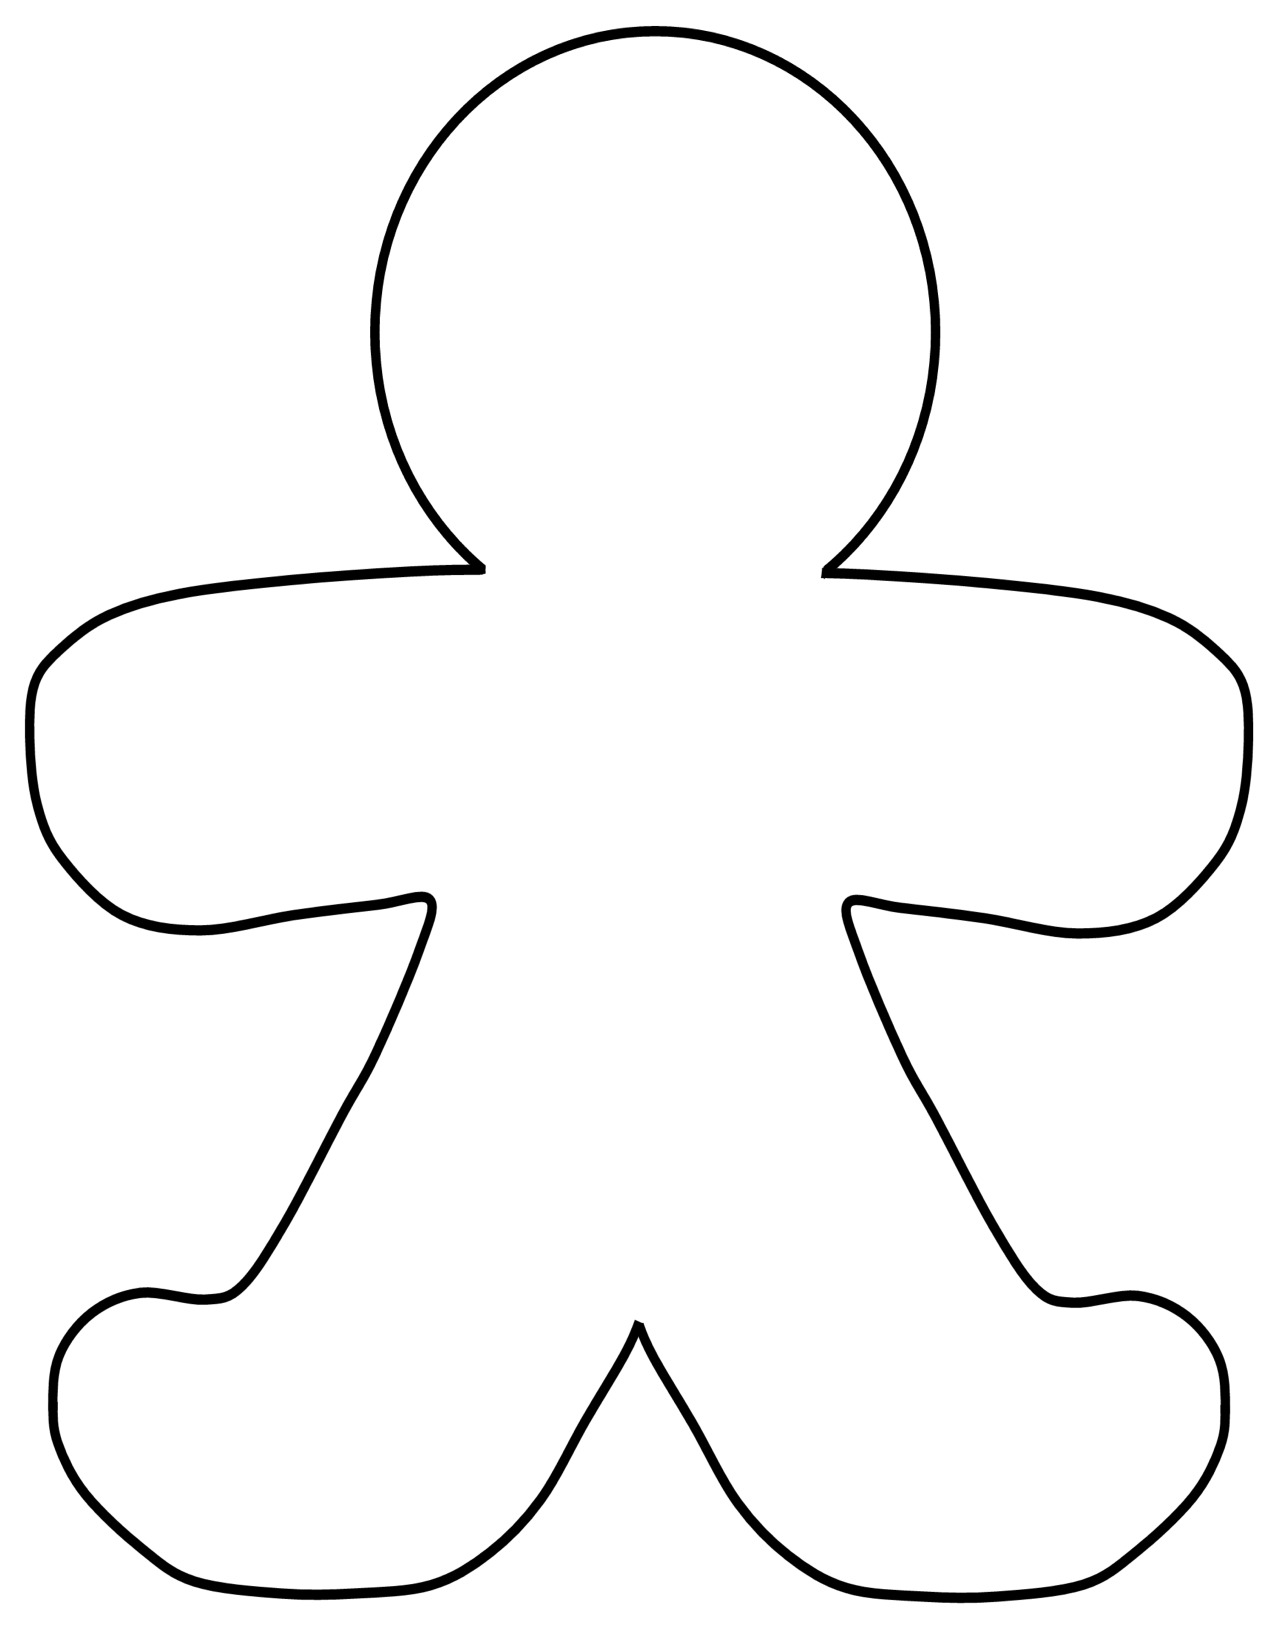 Human Body Outline Template - ClipArt Best